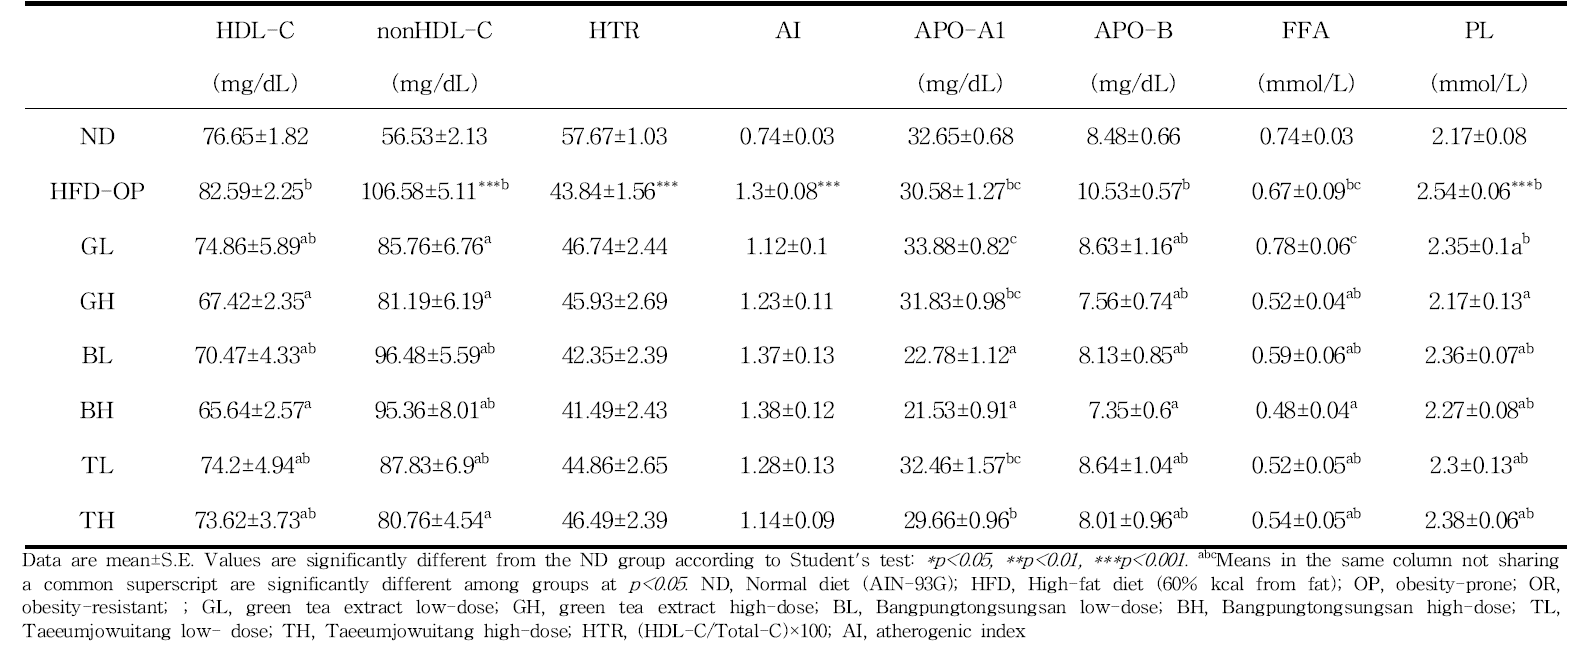 Effect of traditional medicinal prescription for 12 weeks on plasma lipid profiles in C57BL/6J mice fed high-fat diet (Comparison with HFD-OP group)